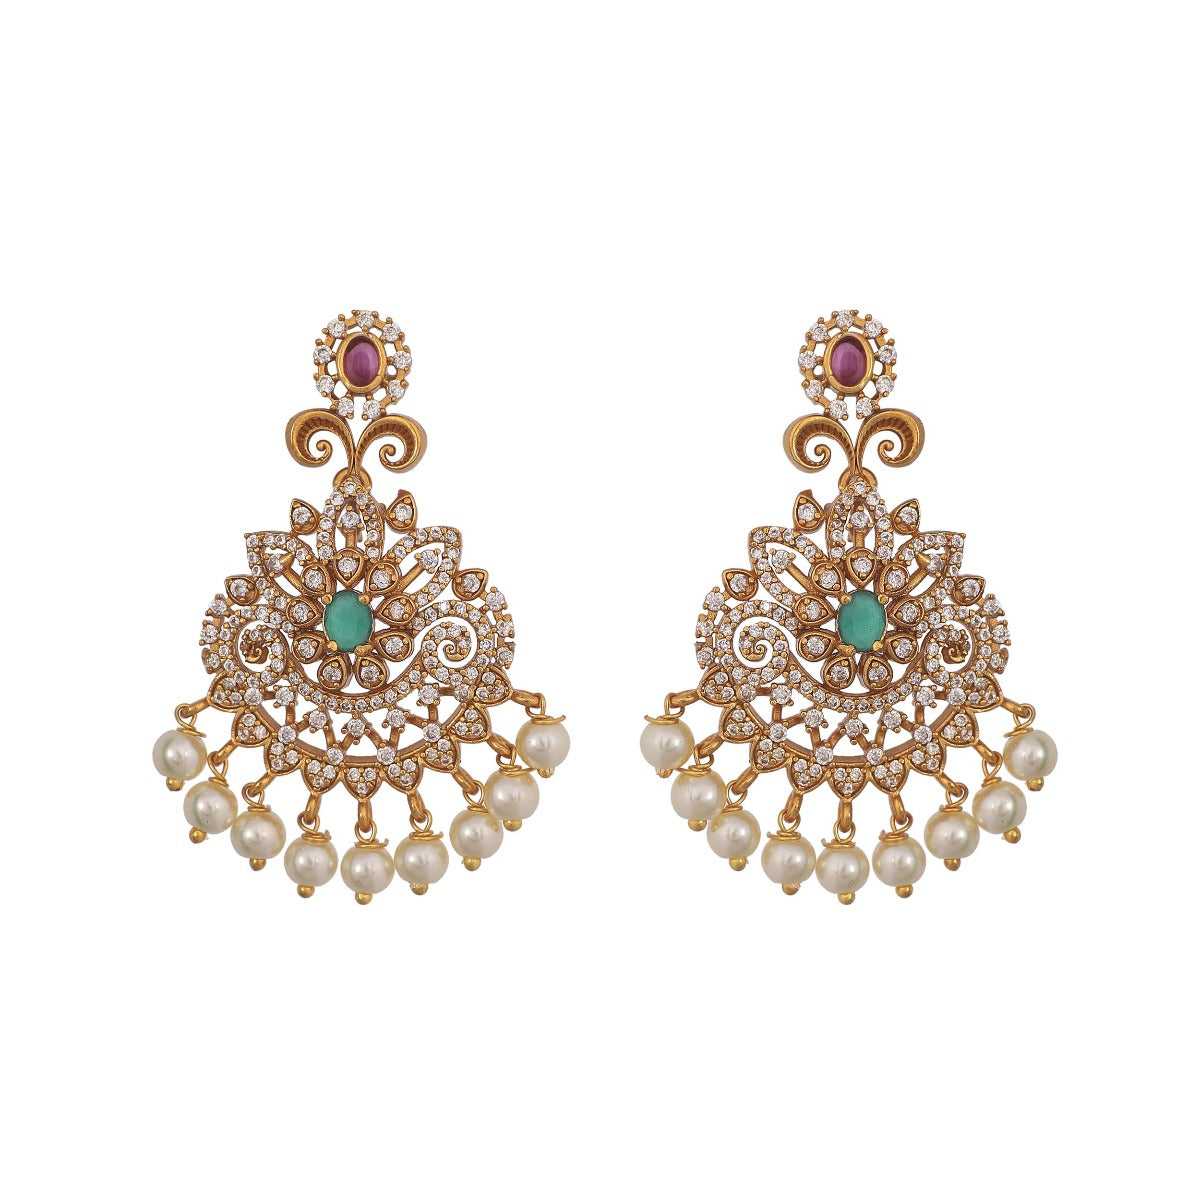 Antique Gold Plated Latika Necklace Earrings Set